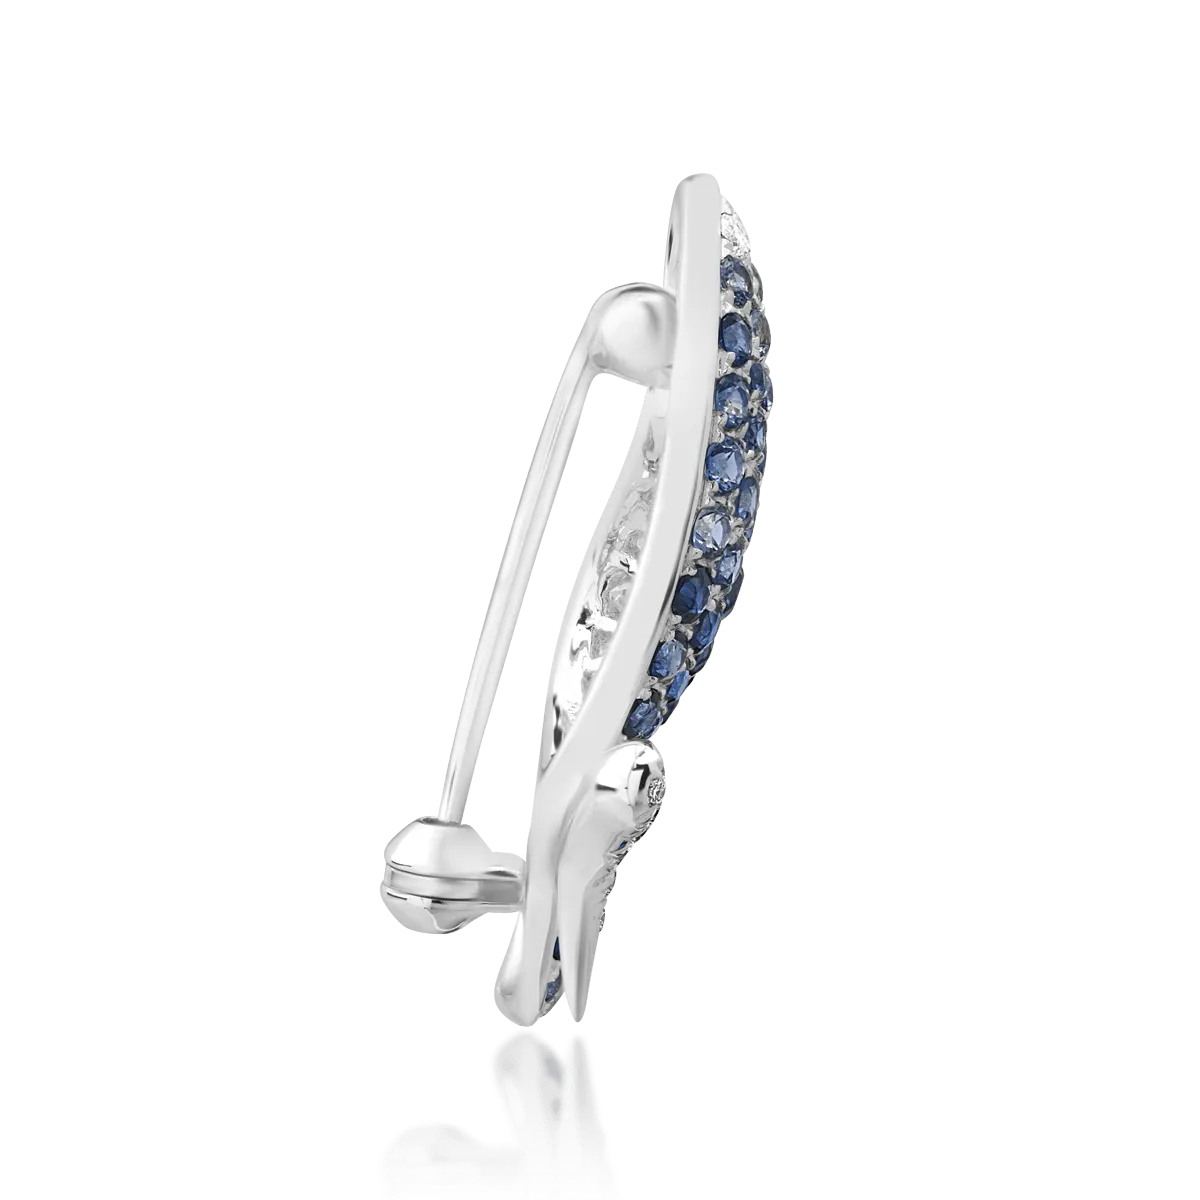 18K white gold brooch with 1.14ct blue sapphires and 0.37ct diamonds